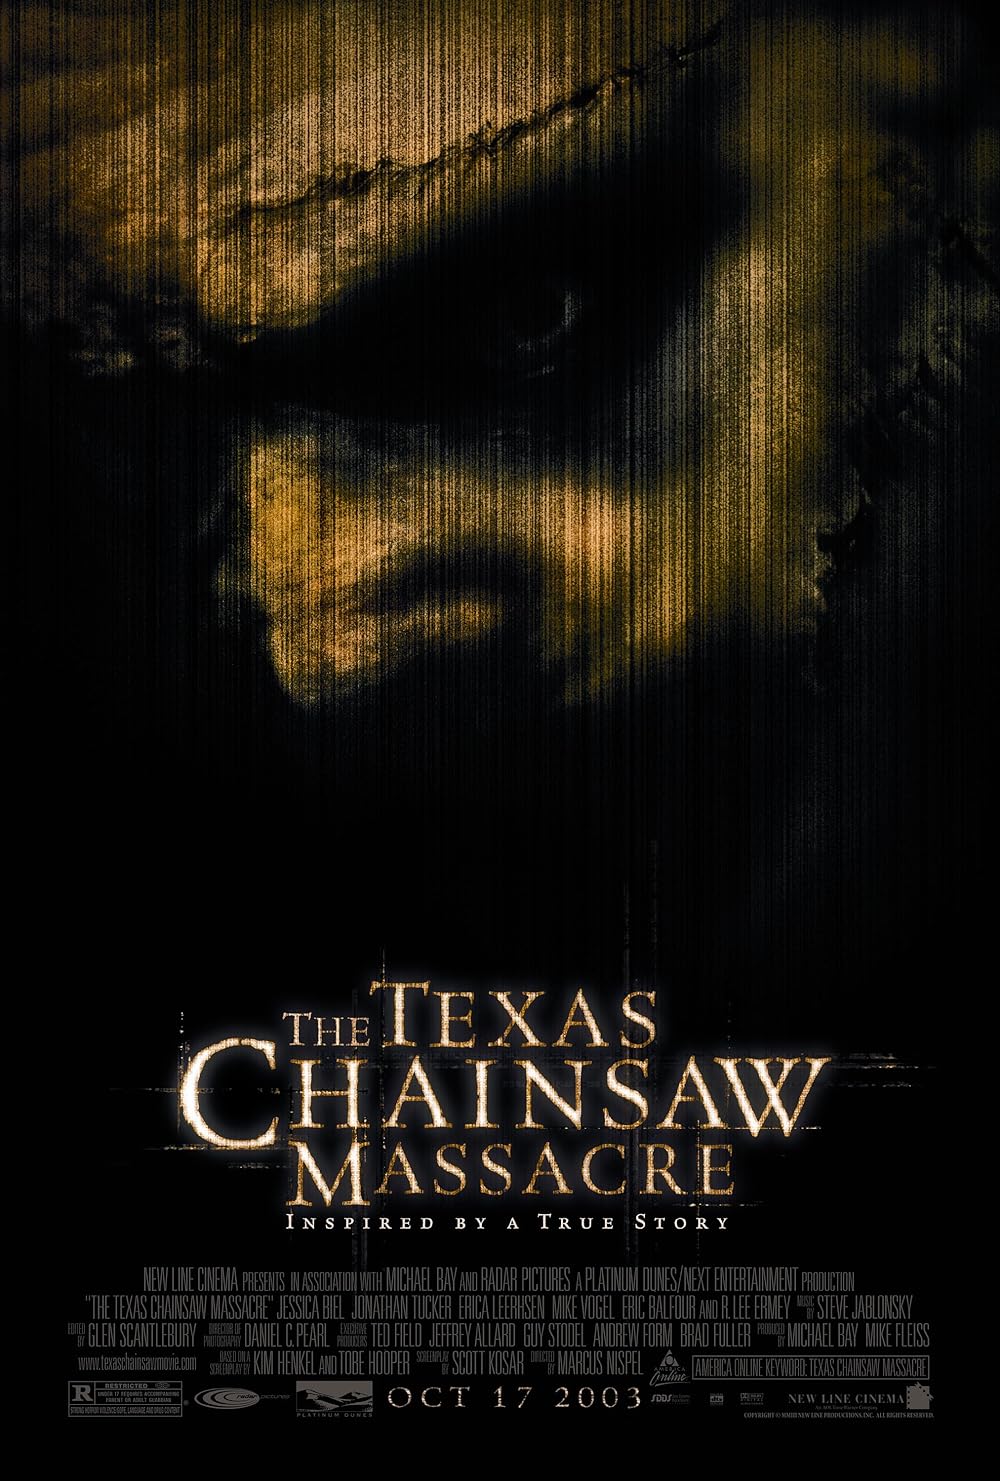 angelica rahmadhani recommends the texas chainsaw massacre free pic